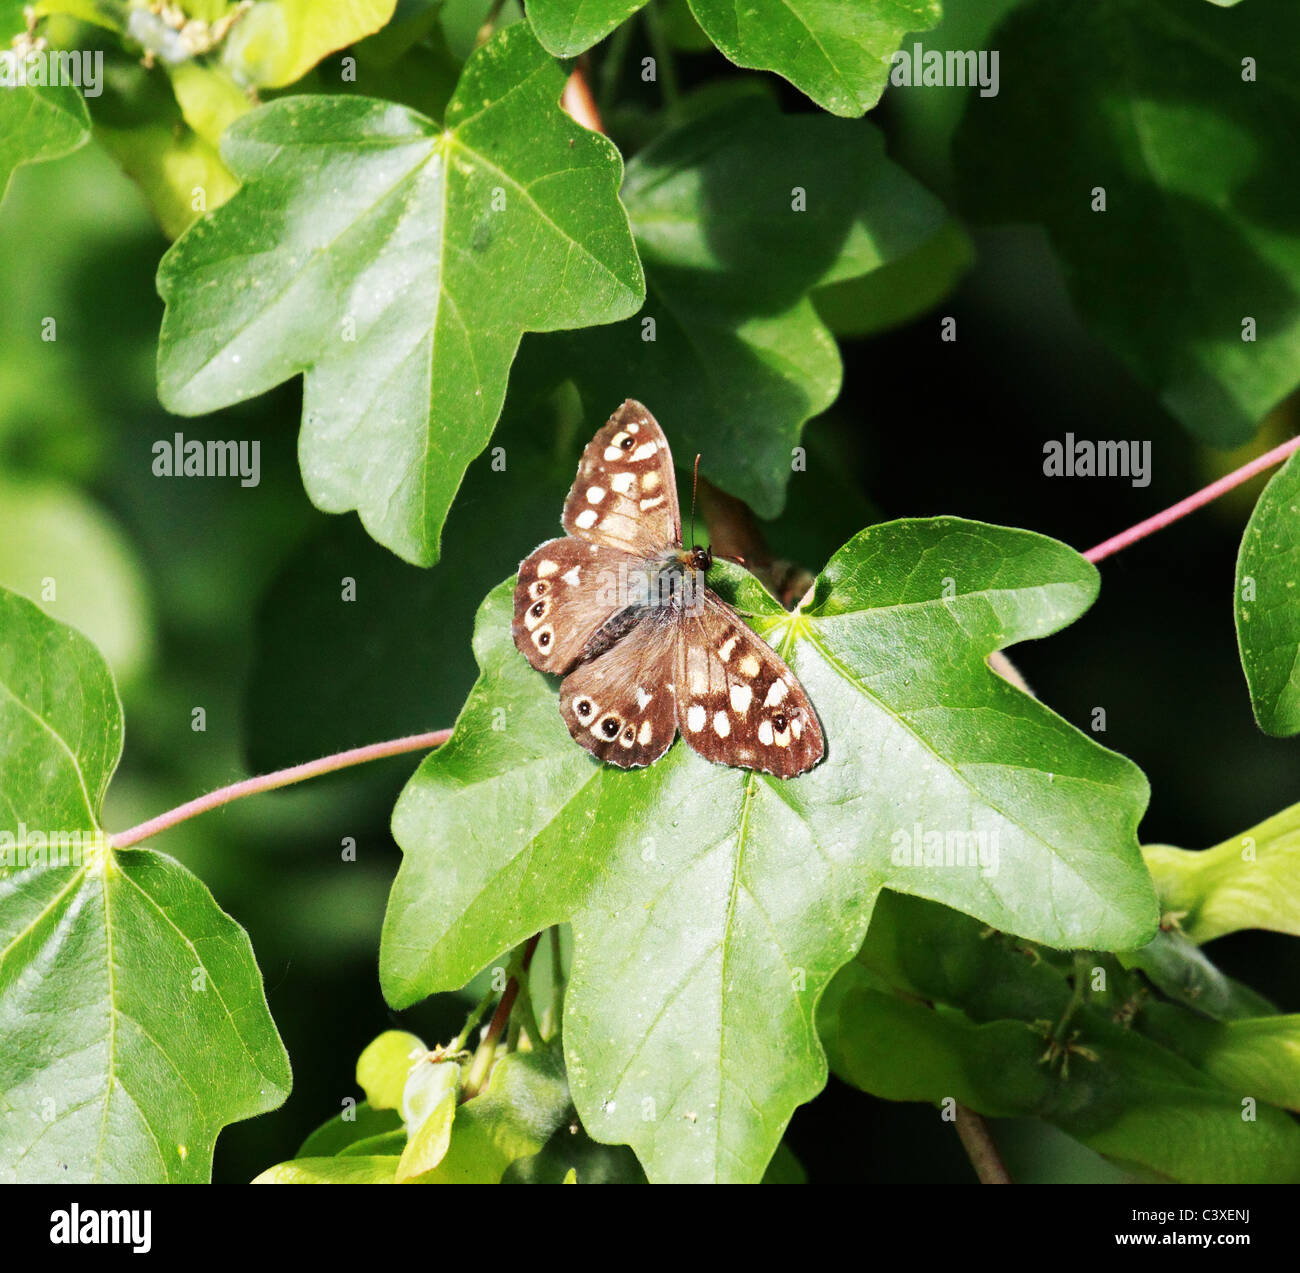 Speckled wood - Pararge aegeria butterfly Stock Photo